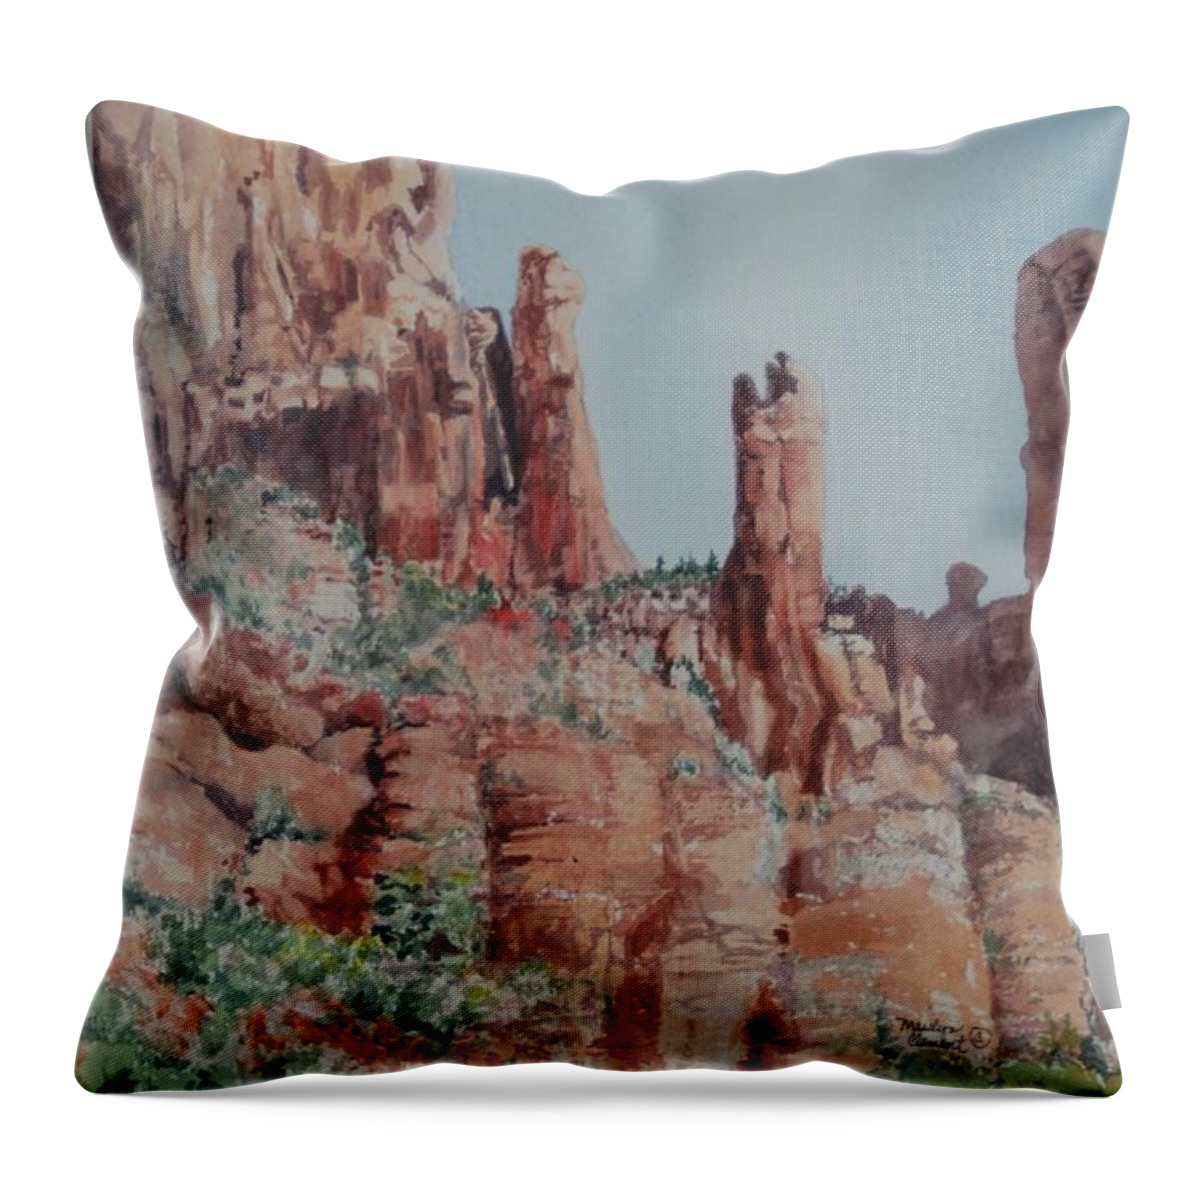 Sedona Throw Pillow featuring the painting Sedona by Marilyn Clement